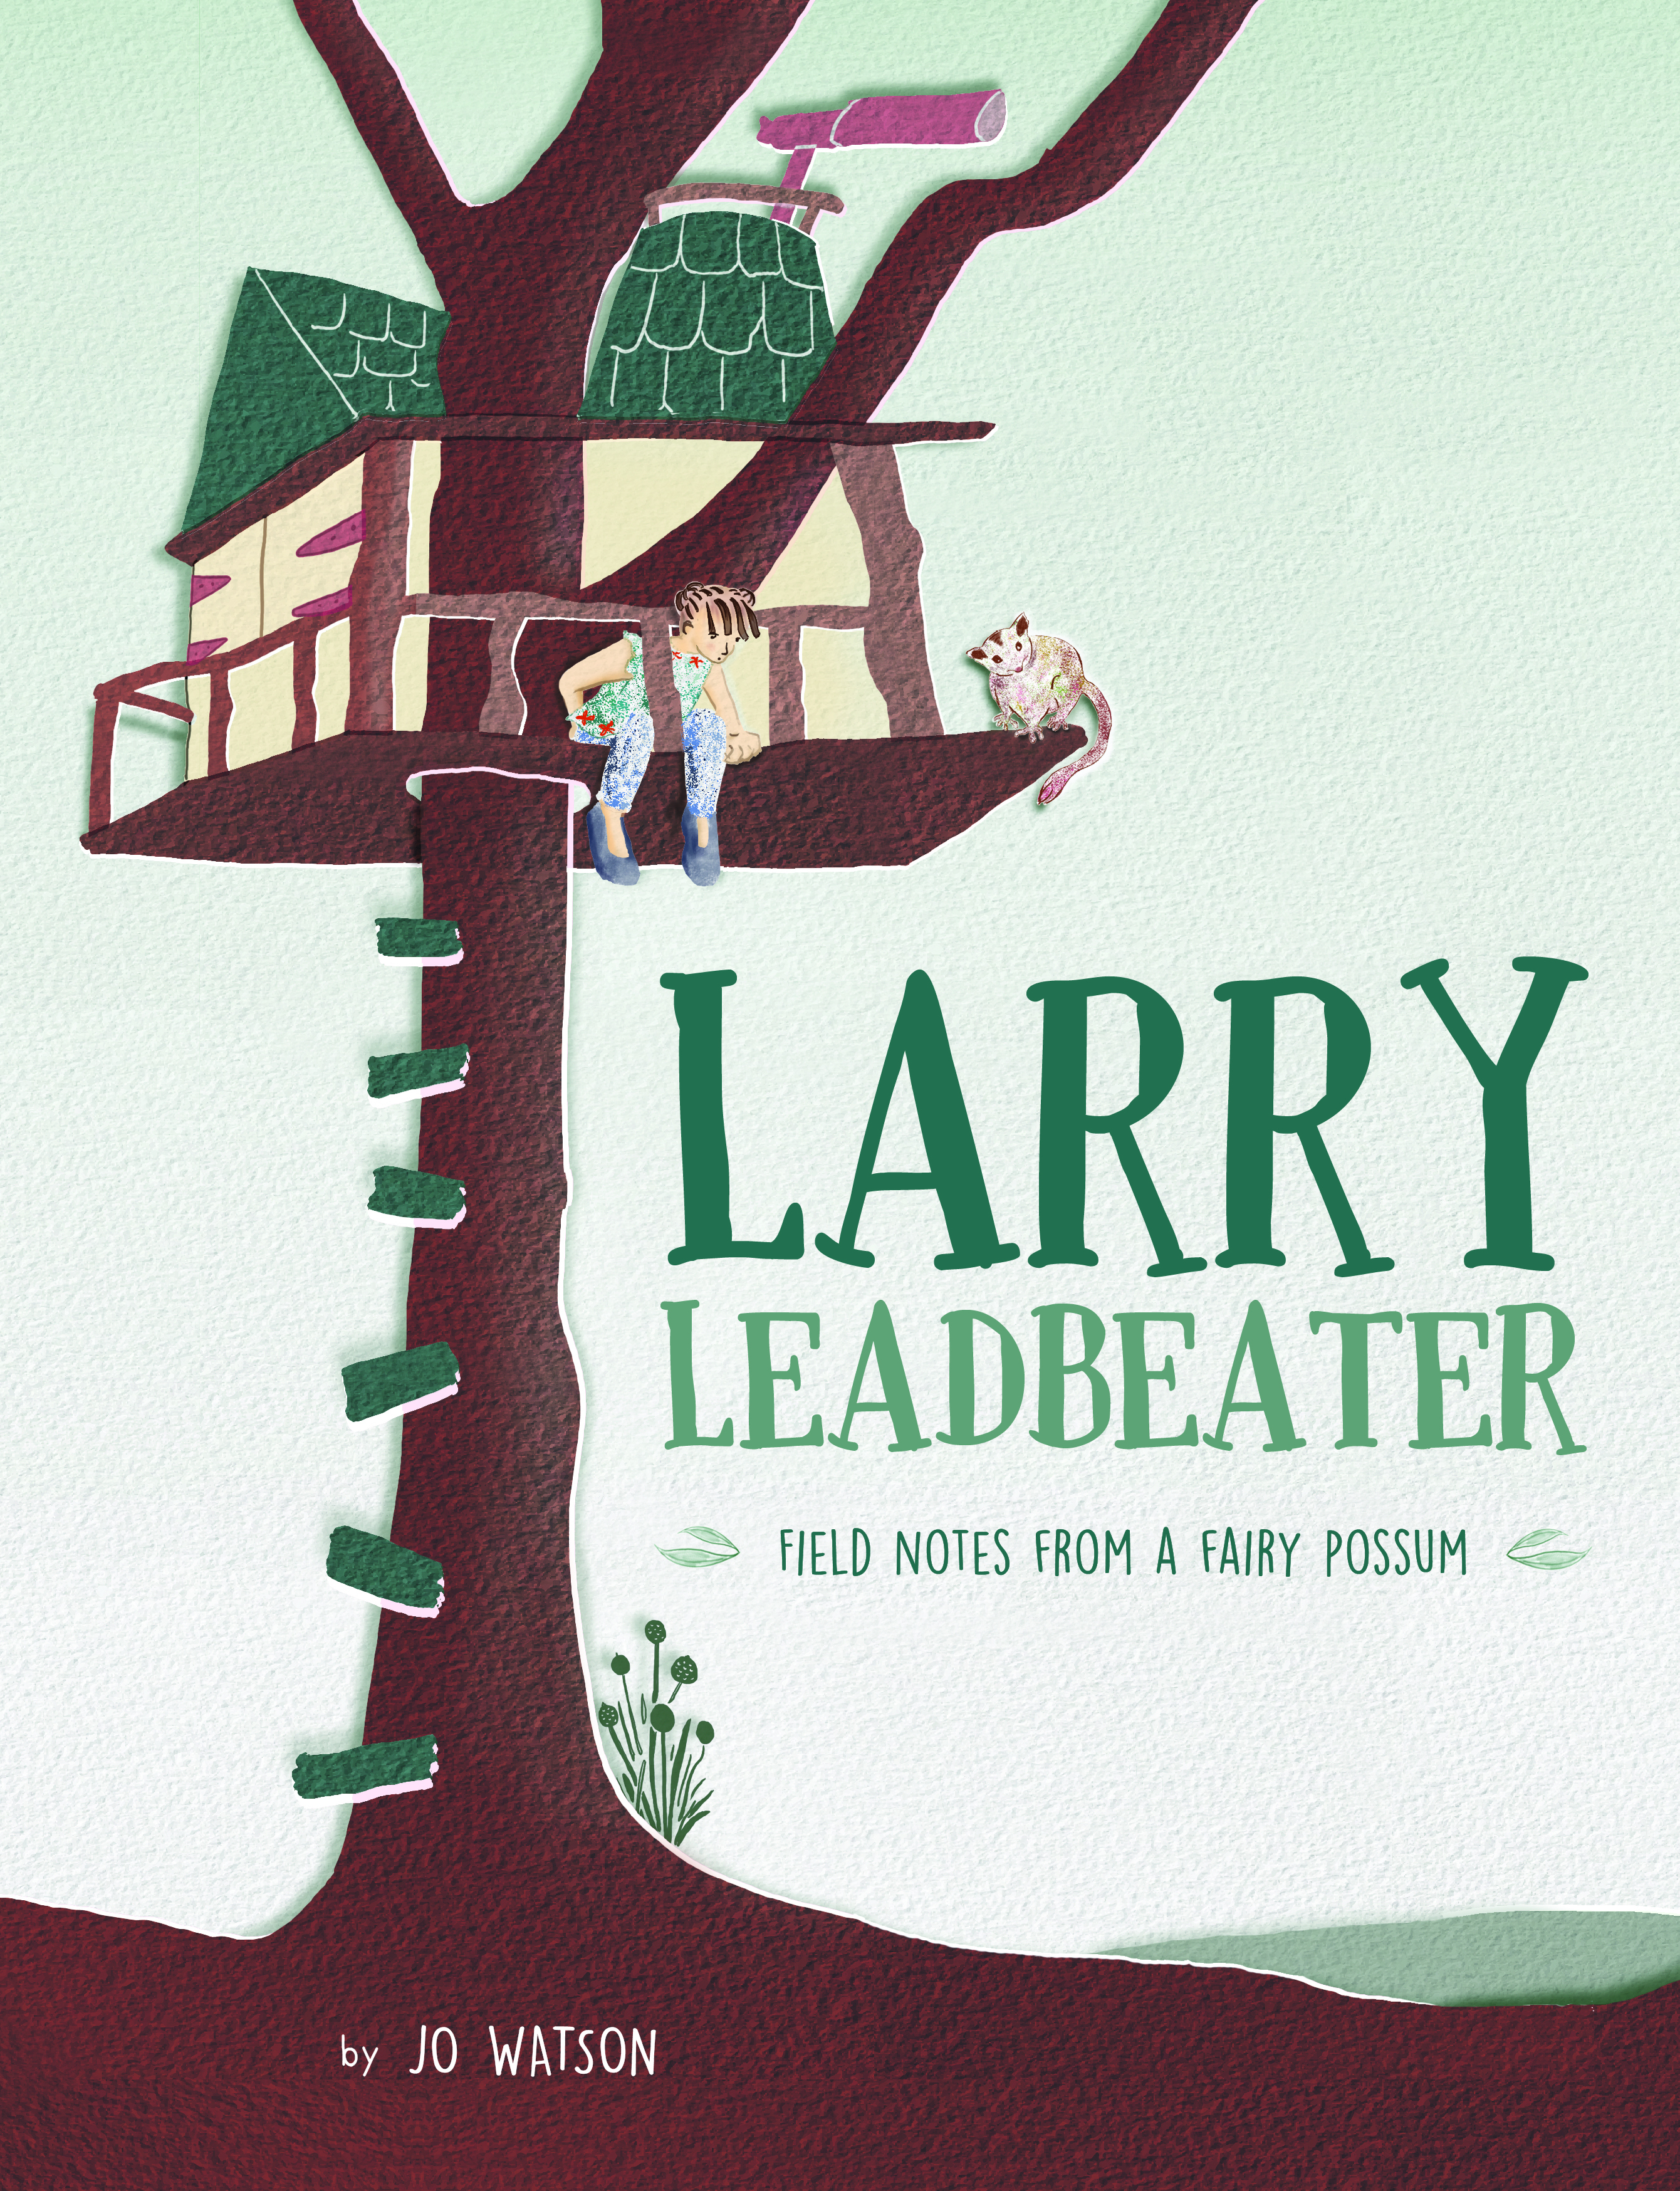 Larry Leadbeater: Field notes from a fairy possum